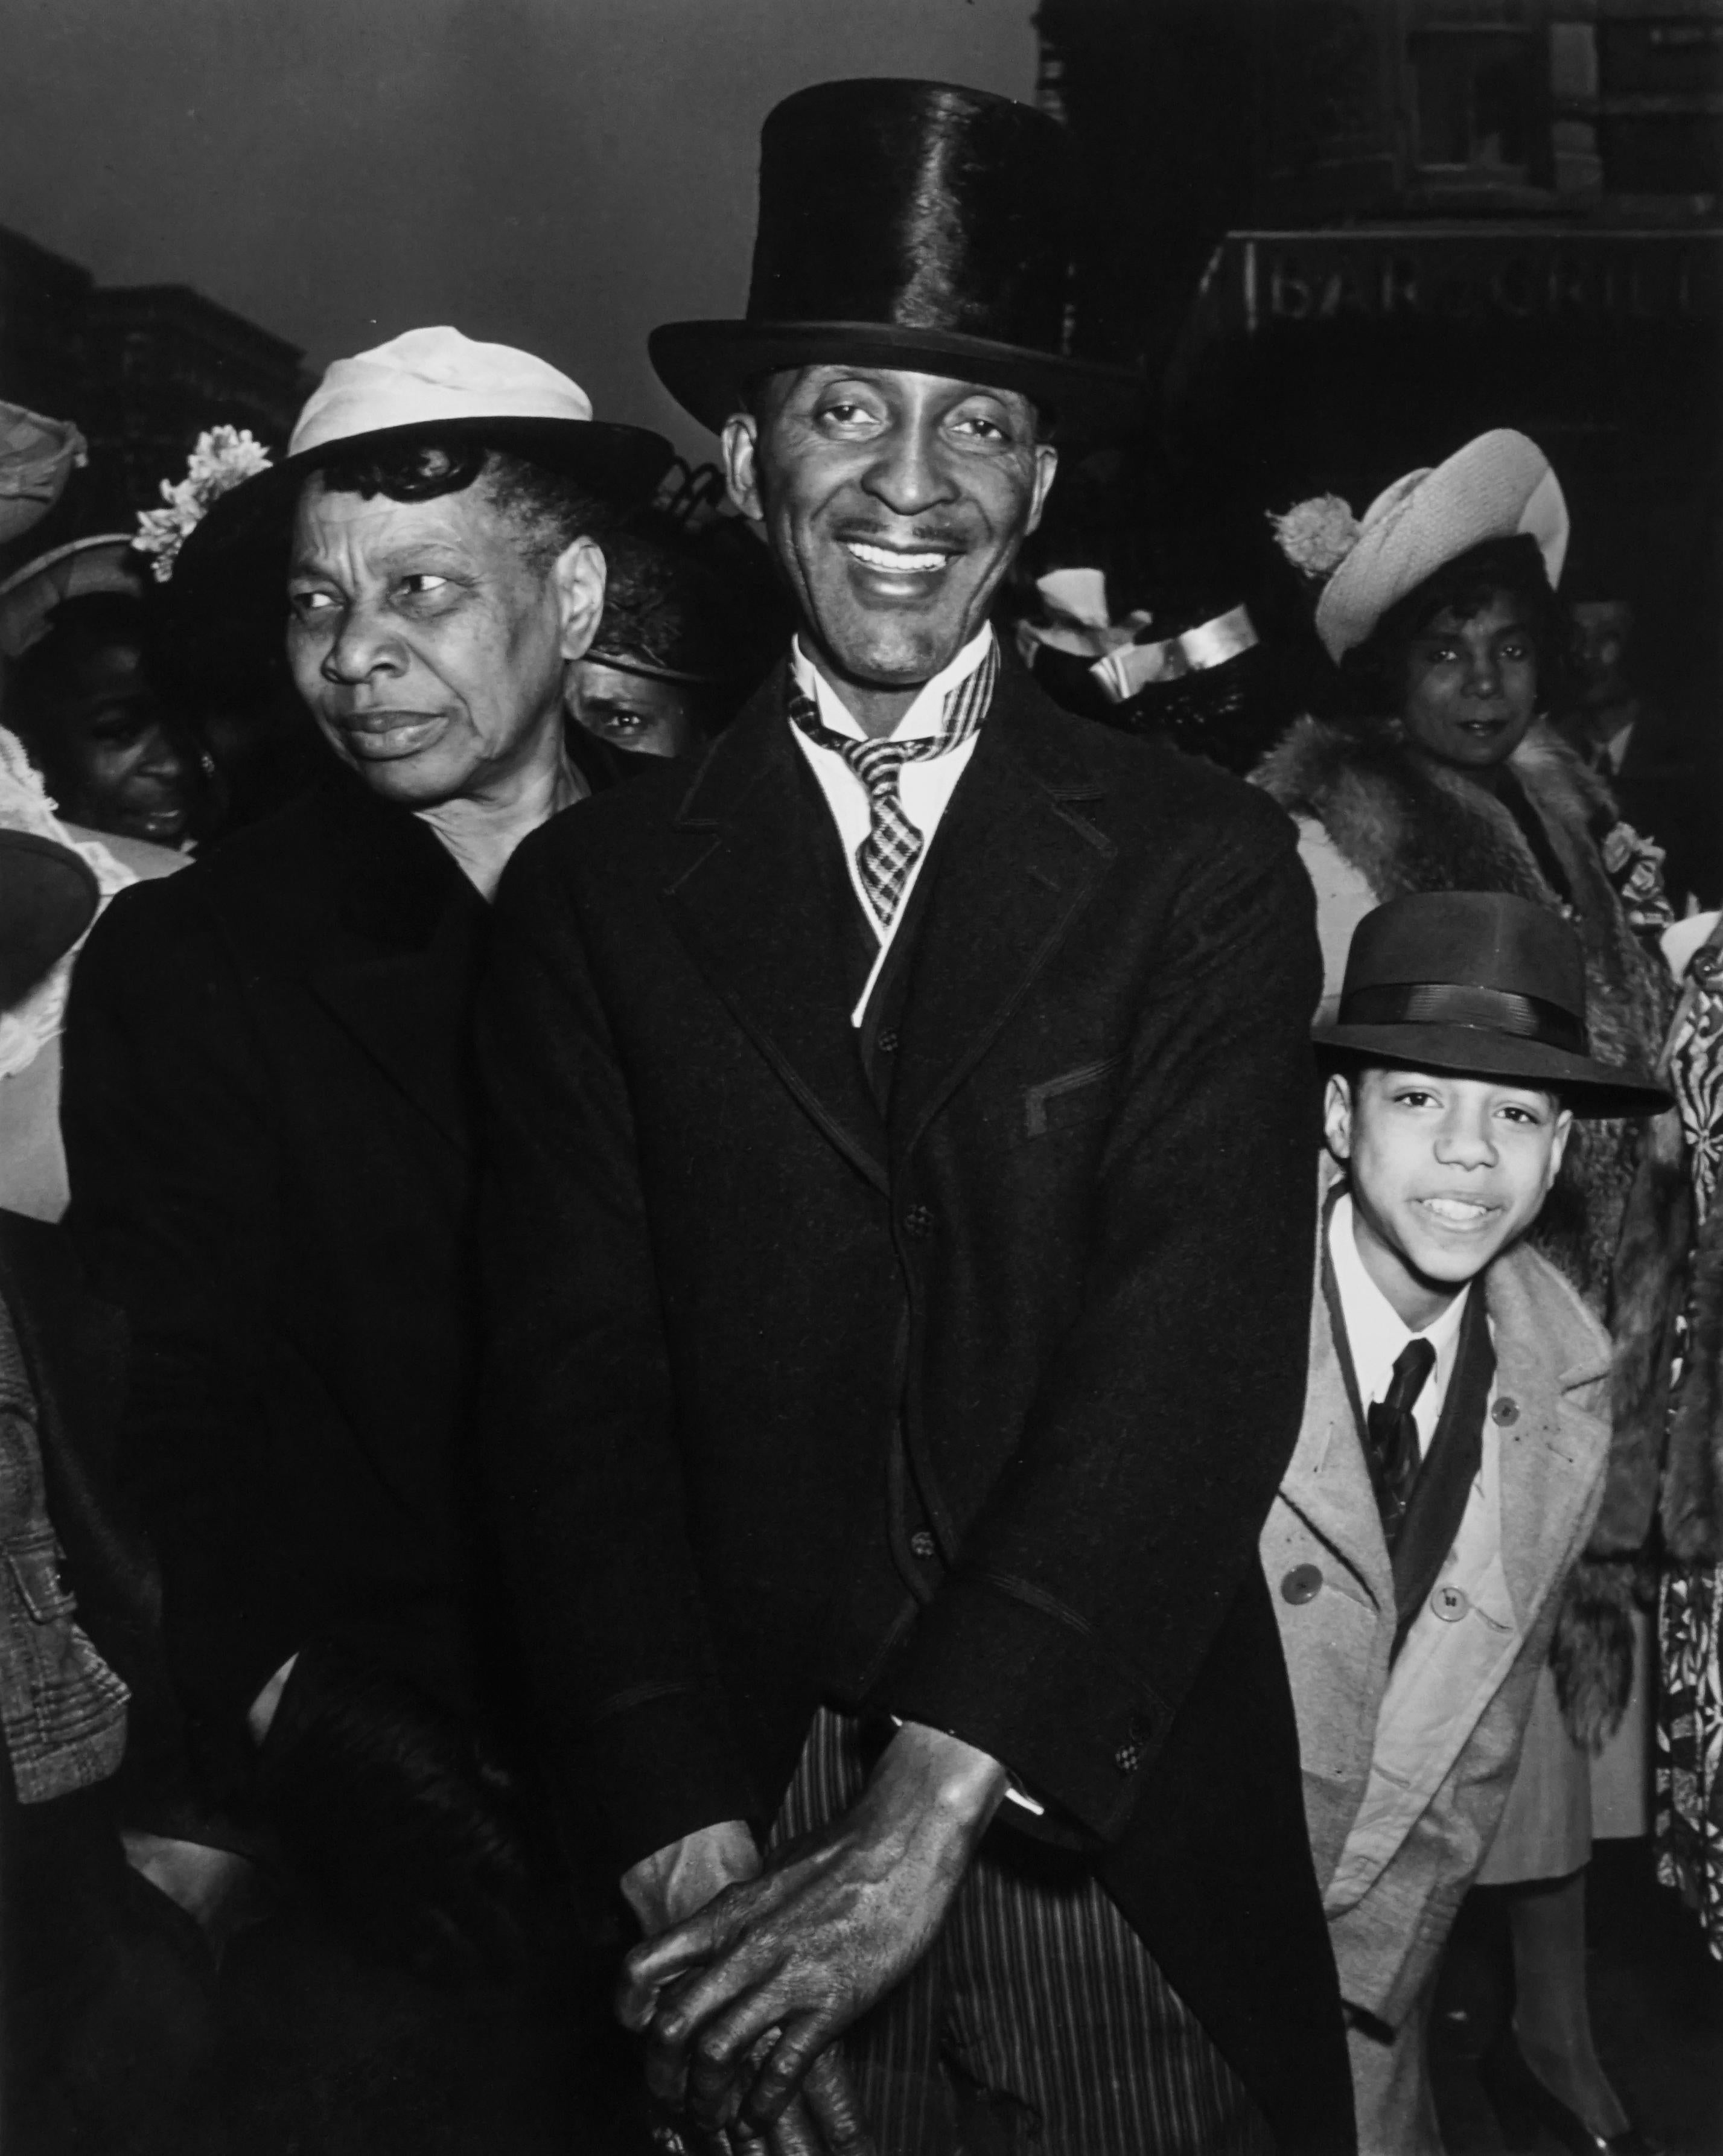 Weegee Black and White Photograph - Easter Sunday in Harlem, 1940